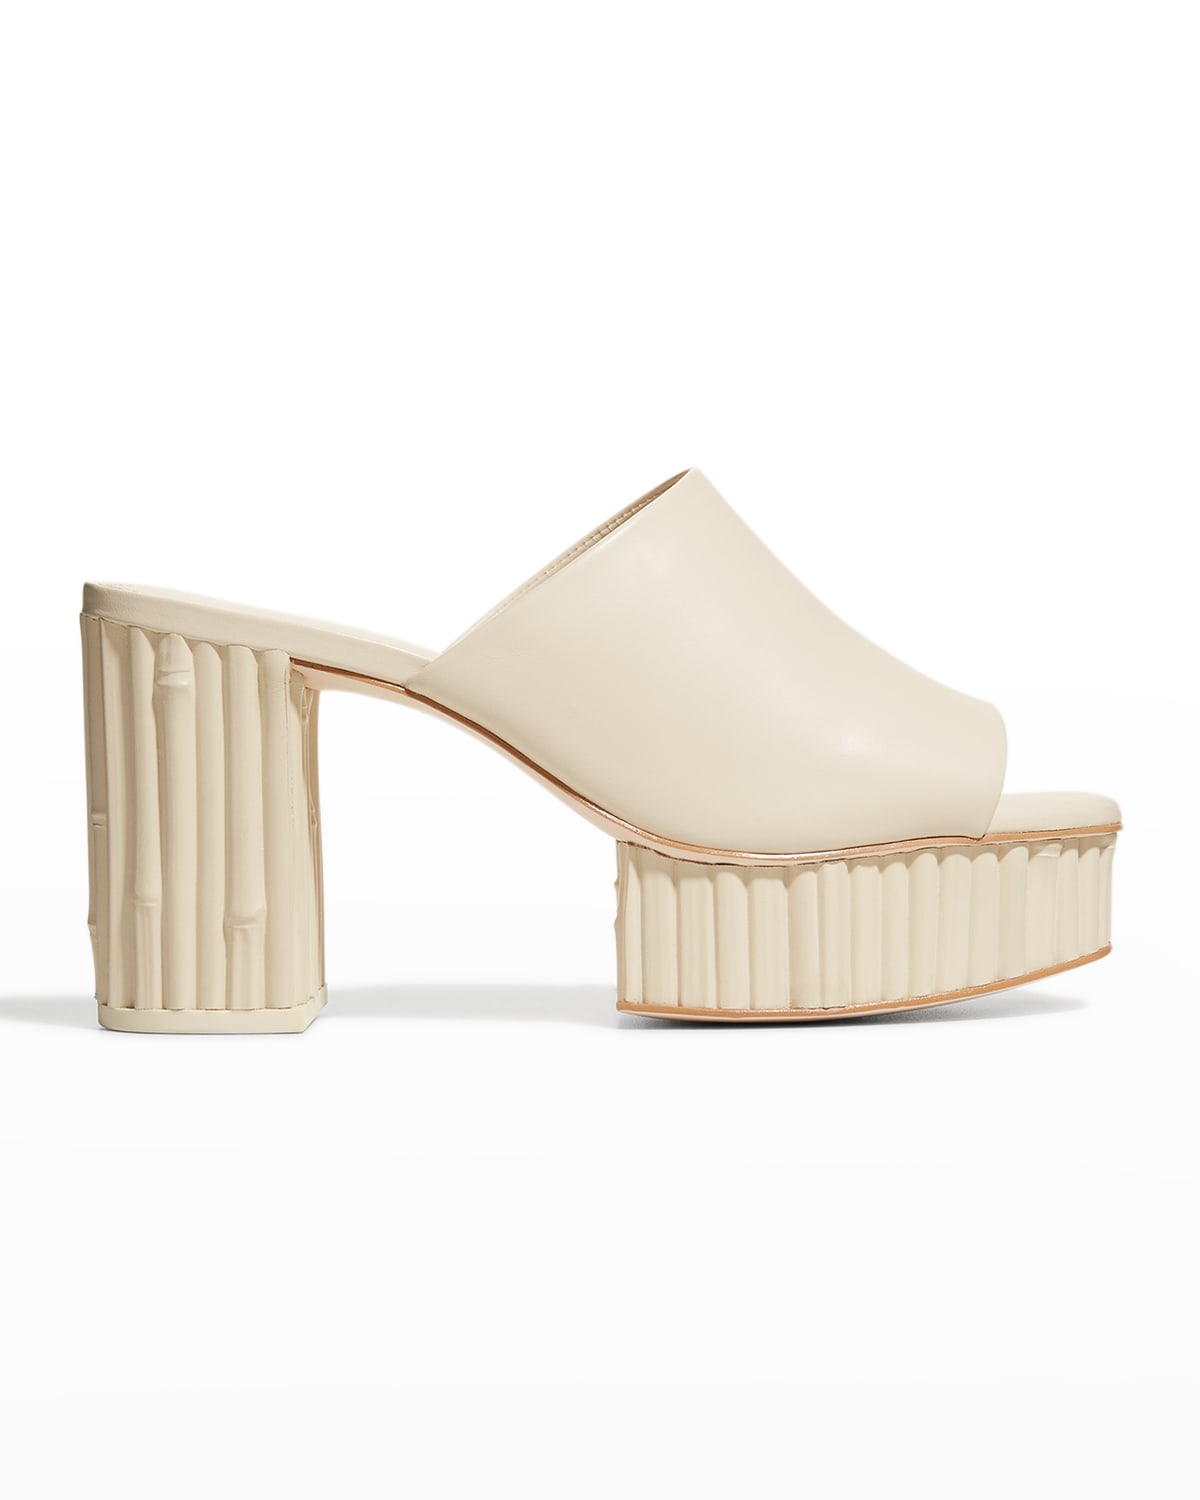 Cult Gaia Judith Leather Wooden Platform Mules